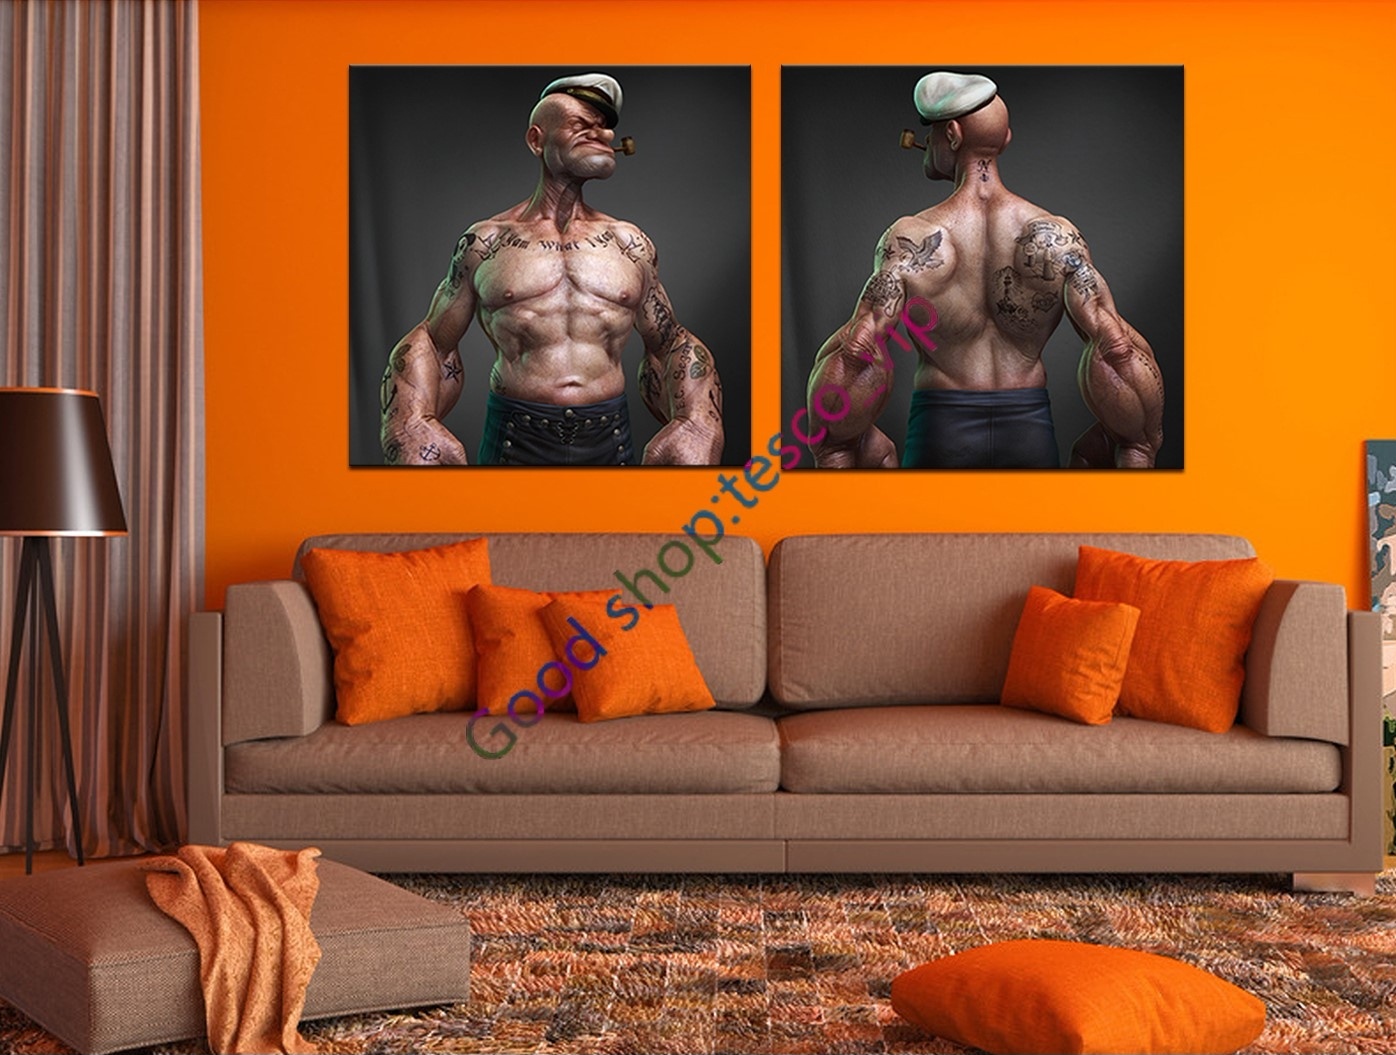 

2 Panel Modern Abstract The Smoking rod in its mouth Cool Popeye tattoo Painting On Canvas No Frame